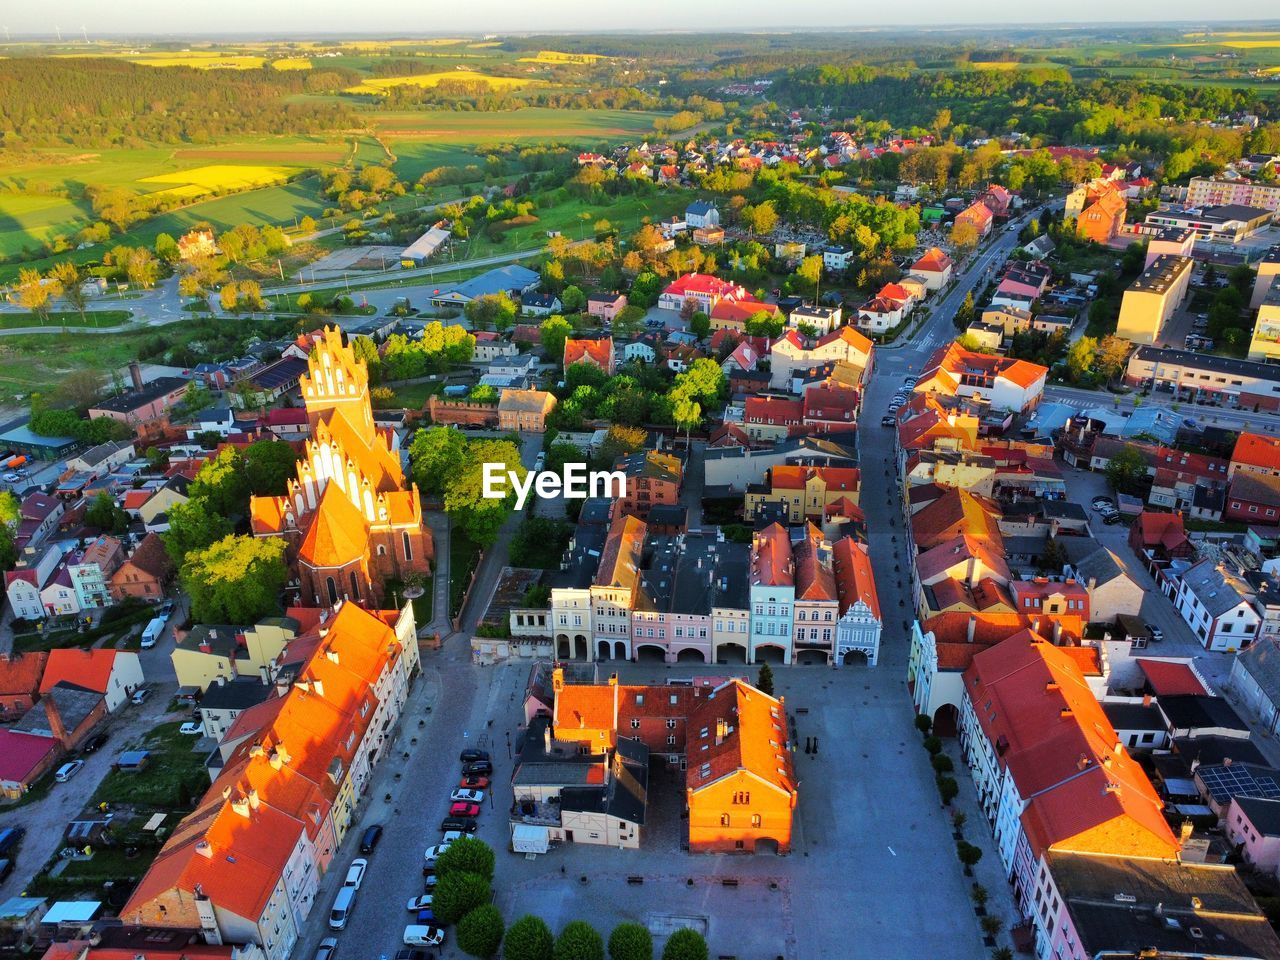 Aerial view of a town in the morning